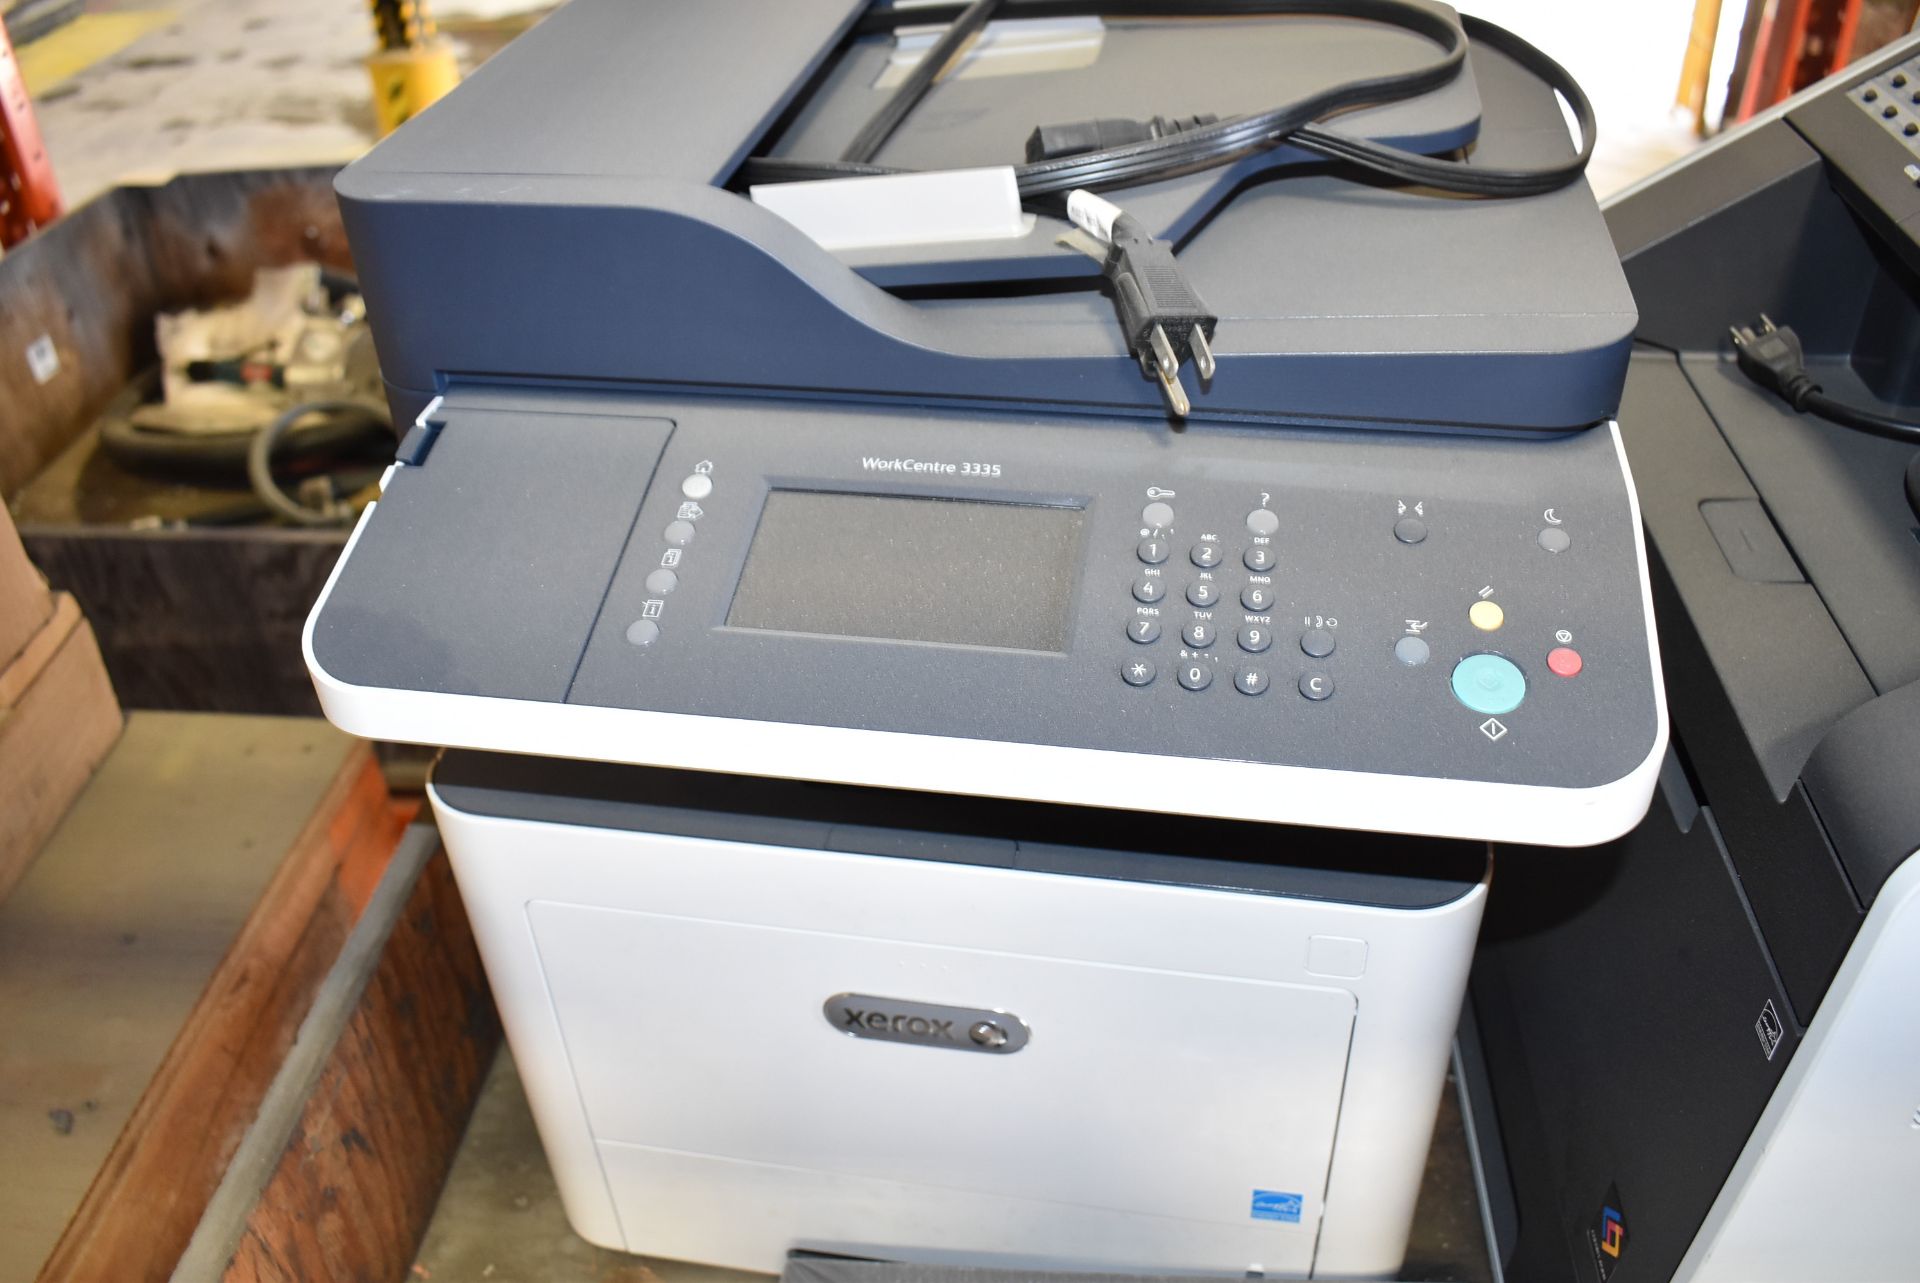 LOT/ BROTHER MFC-9970CDW COLOUR PRINTER, XEROX WORKCENTER 3335 MUTLIFUNCTION PRINTER, NVIDIA PC - Image 4 of 5